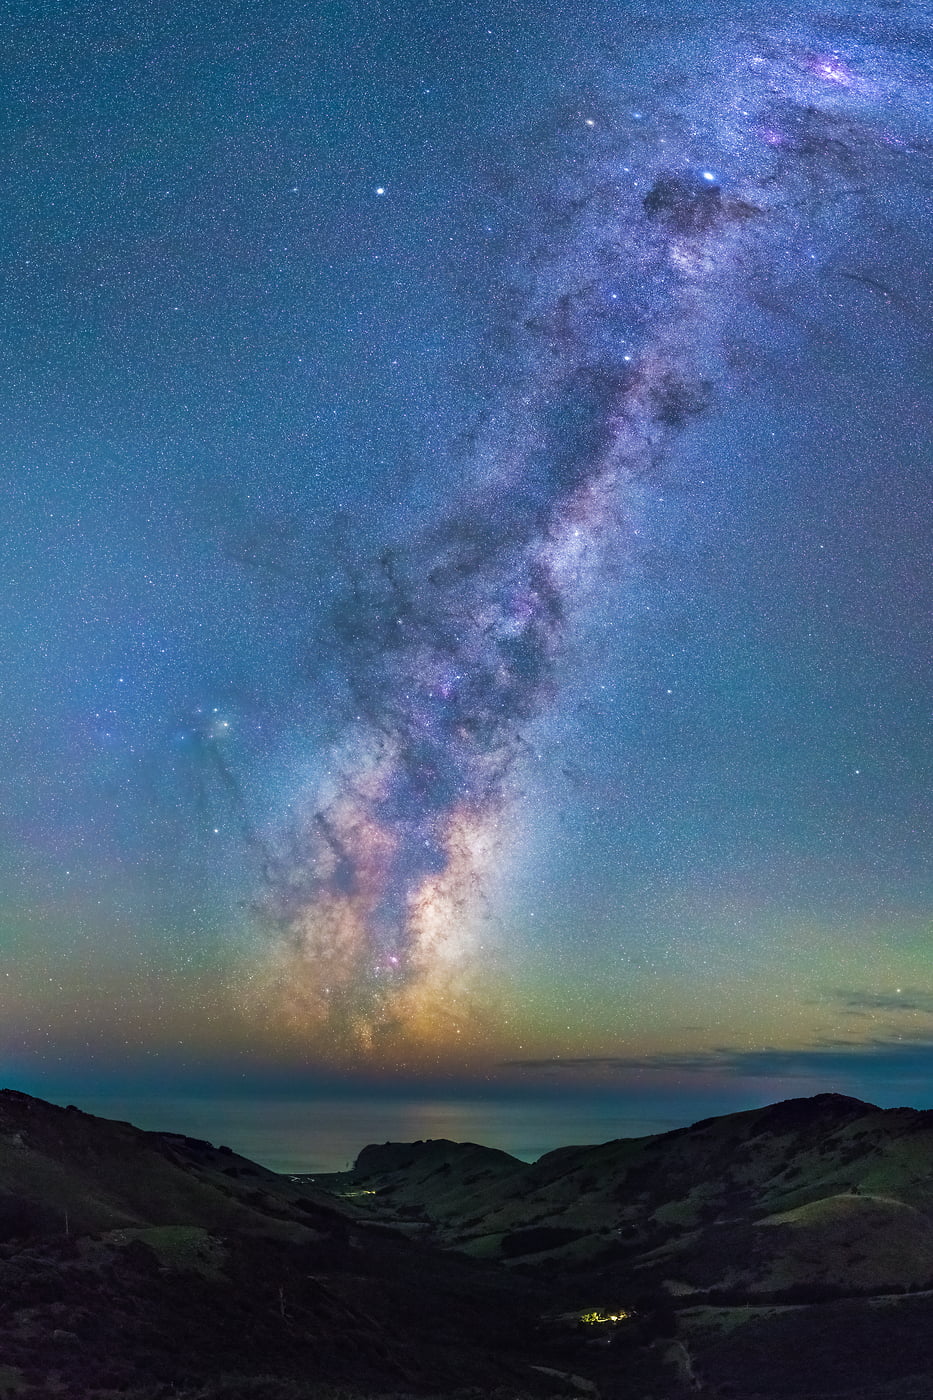 138 megapixels! A very high resolution, large-format VAST photo print of the night sky, milky way, and stars over the ocean; fine art astrophotography landscape photo created by Paul Wilson in Eastern Bays, Banks Peninsula, New Zealand.